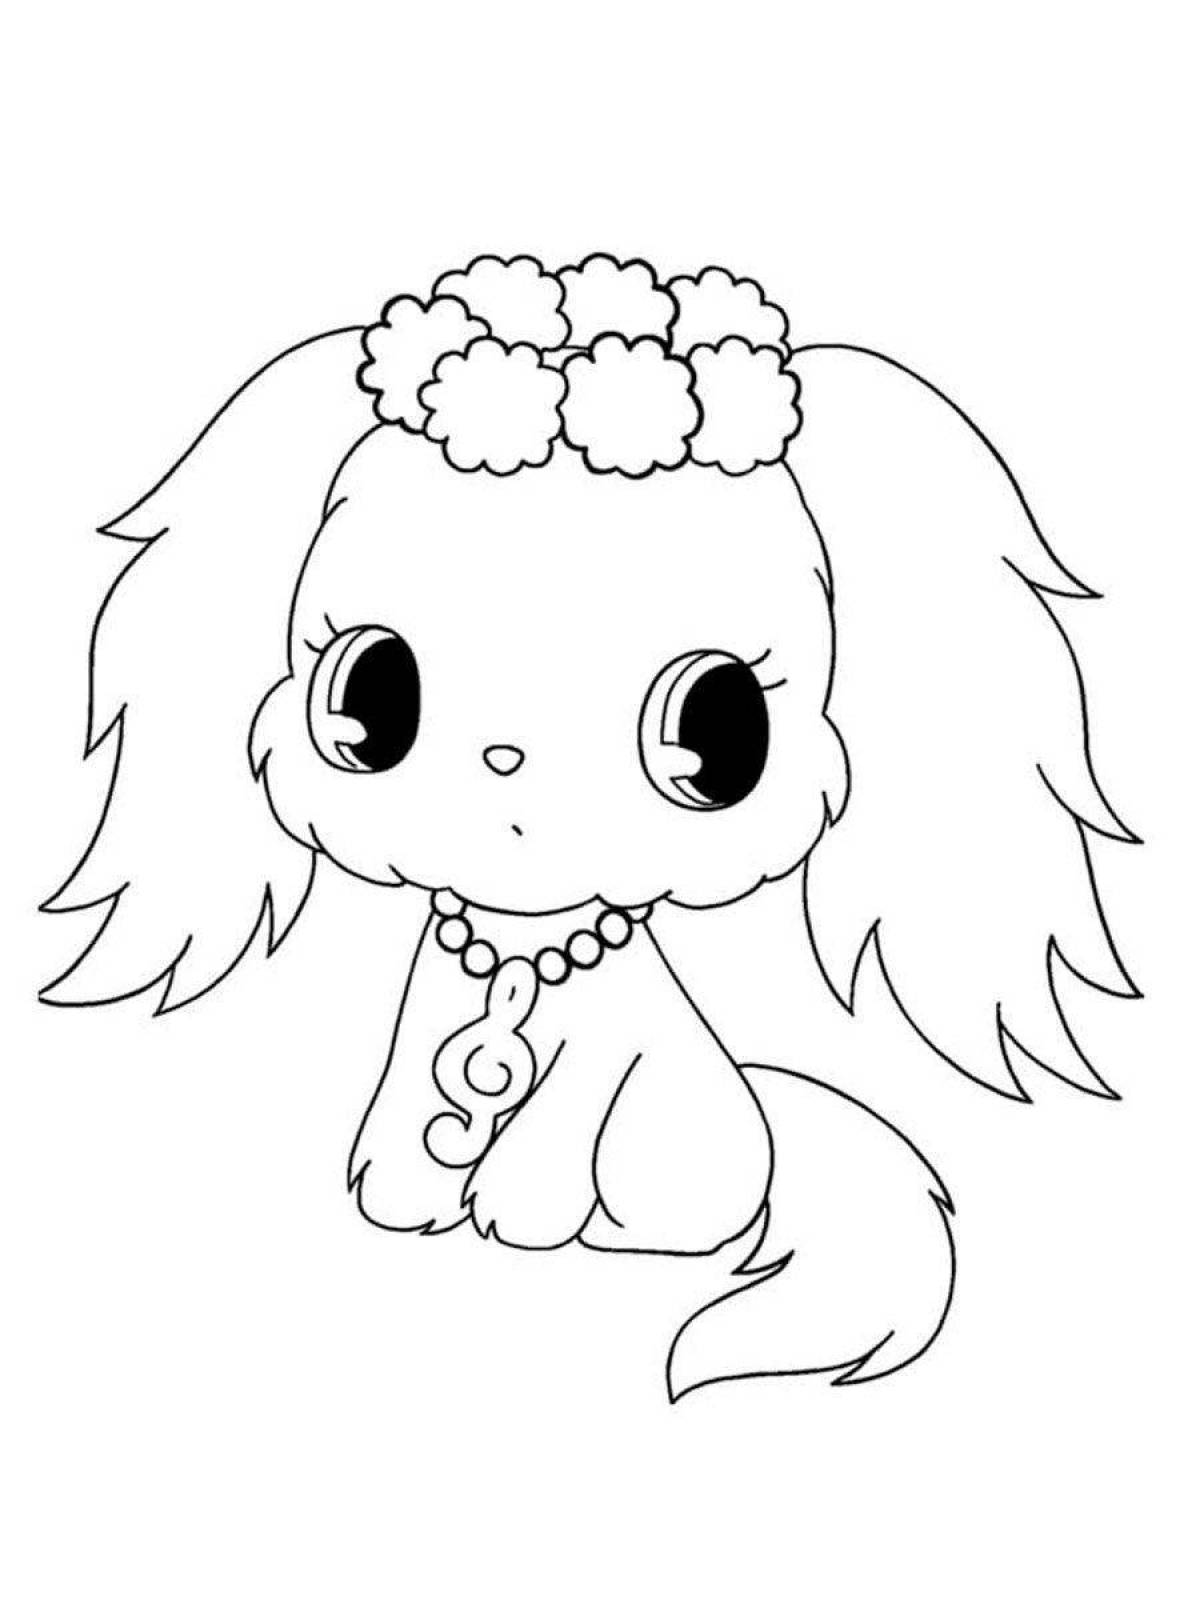 Affectionate cute dog coloring pages for girls